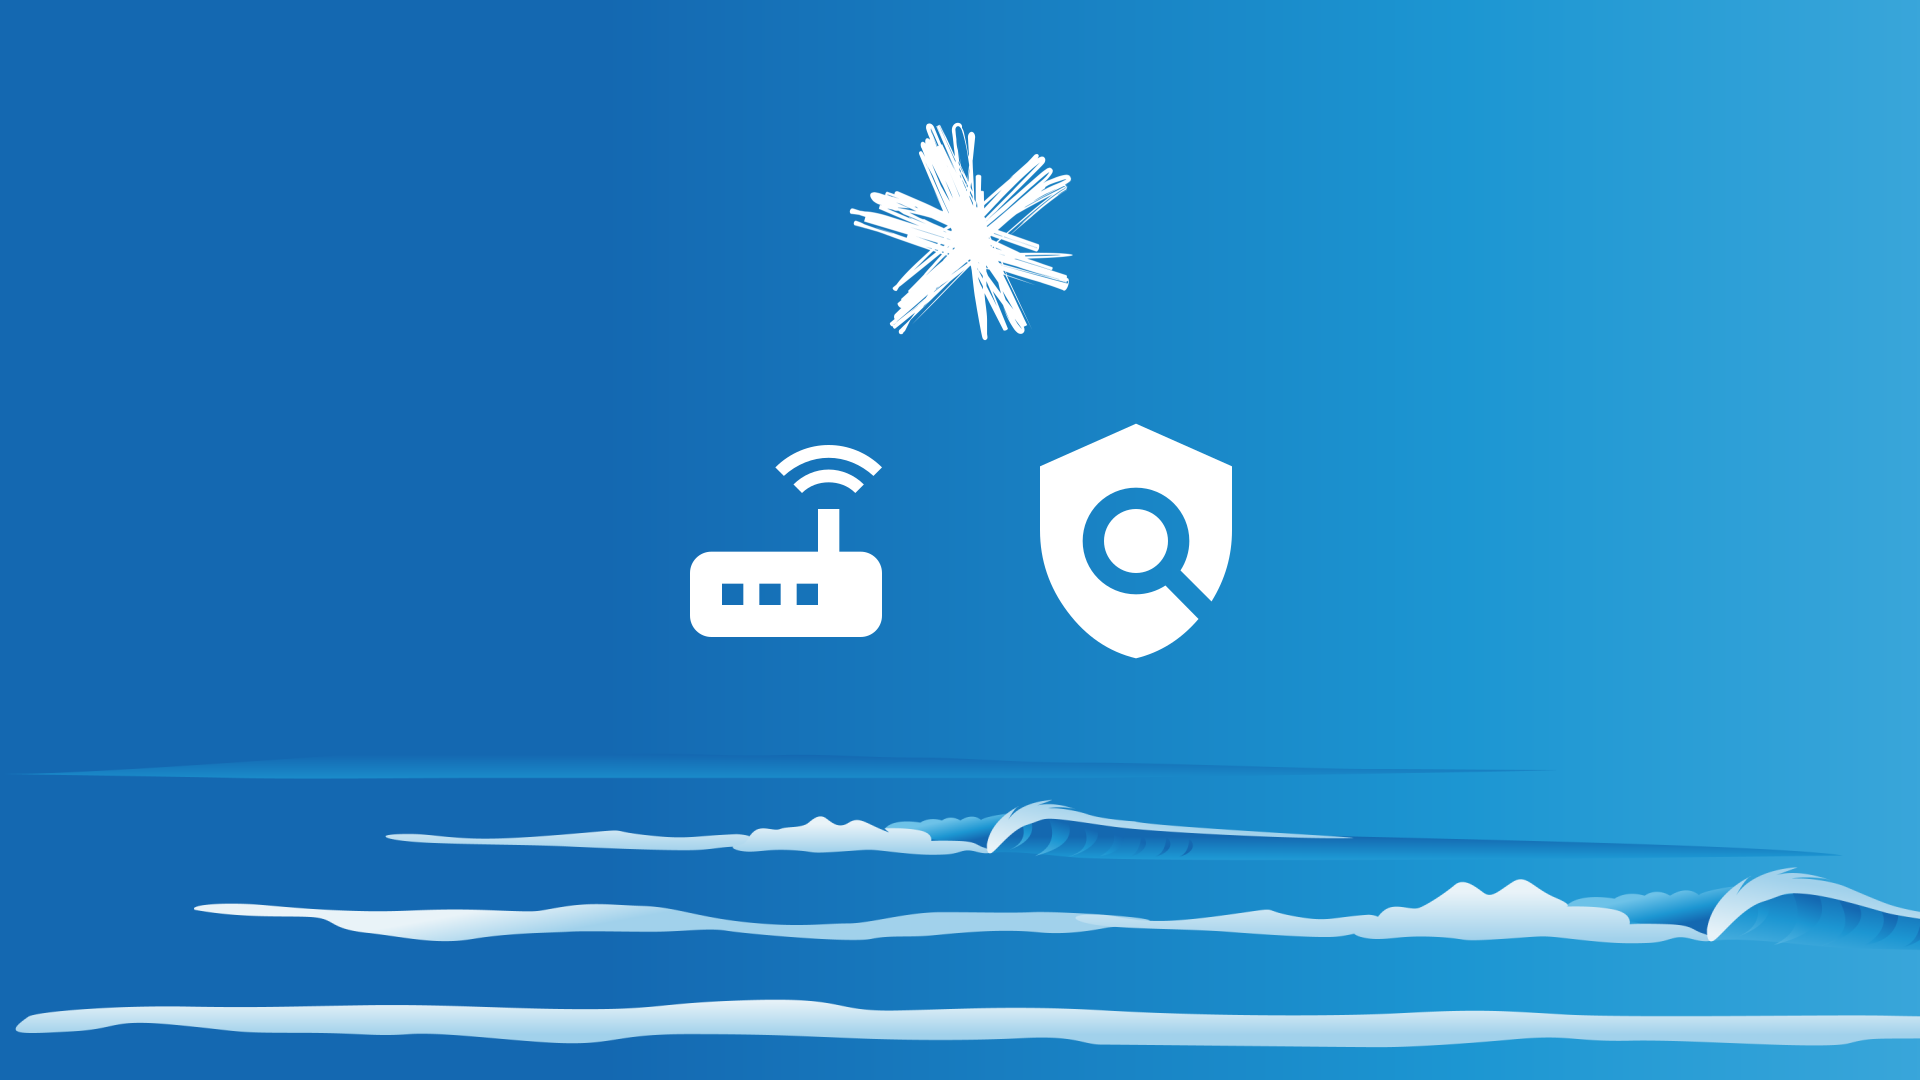 Sea background with Spark NZ logo and wireless router icon